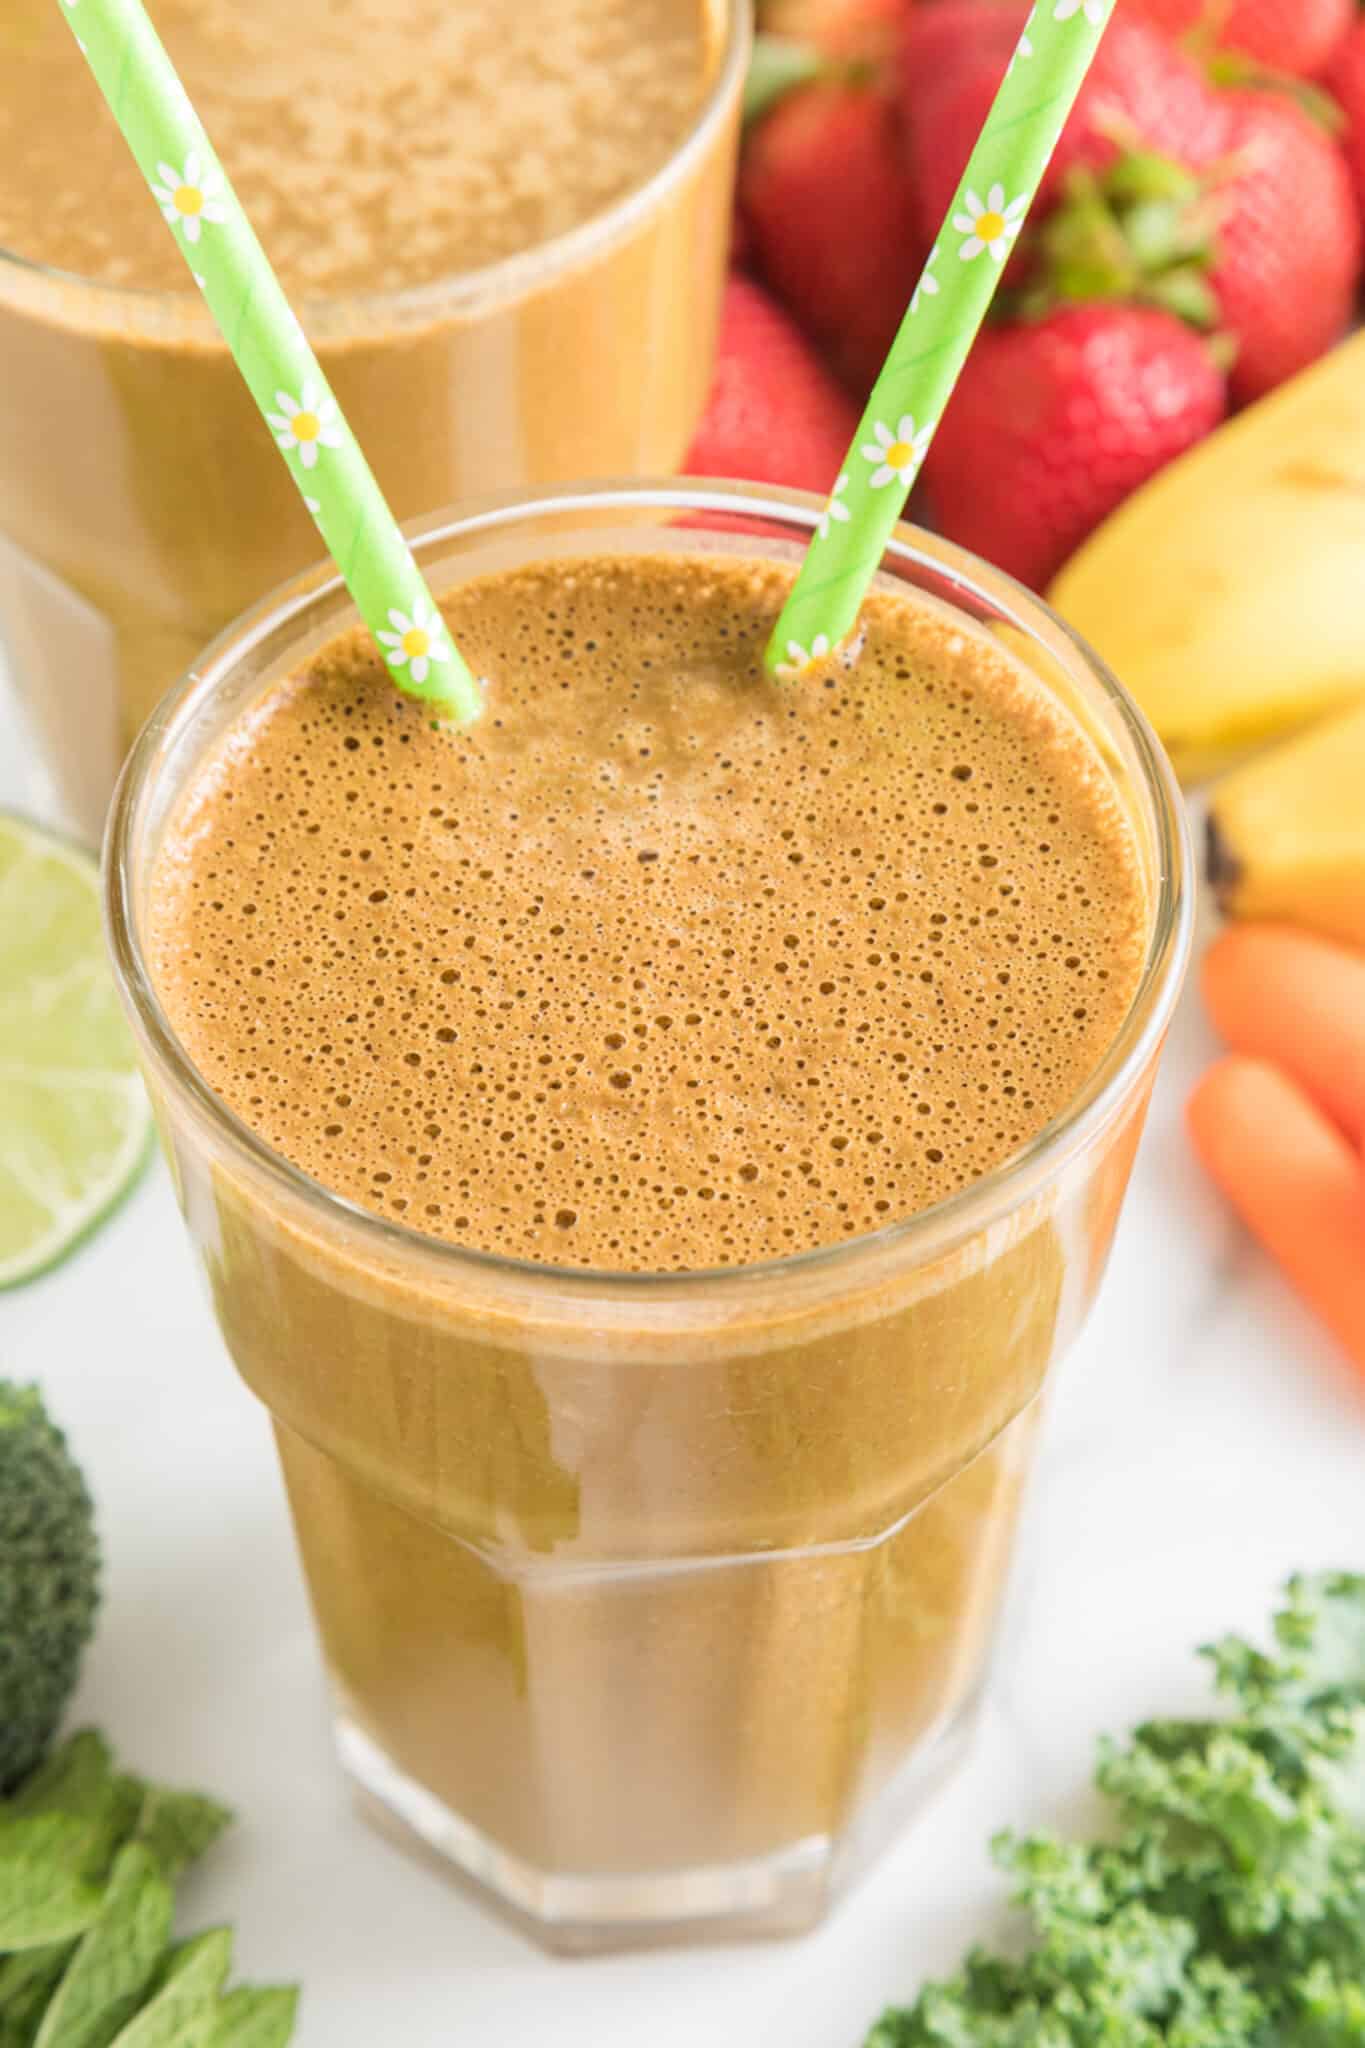 Cocoa green smoothie in a glass with two green straws.